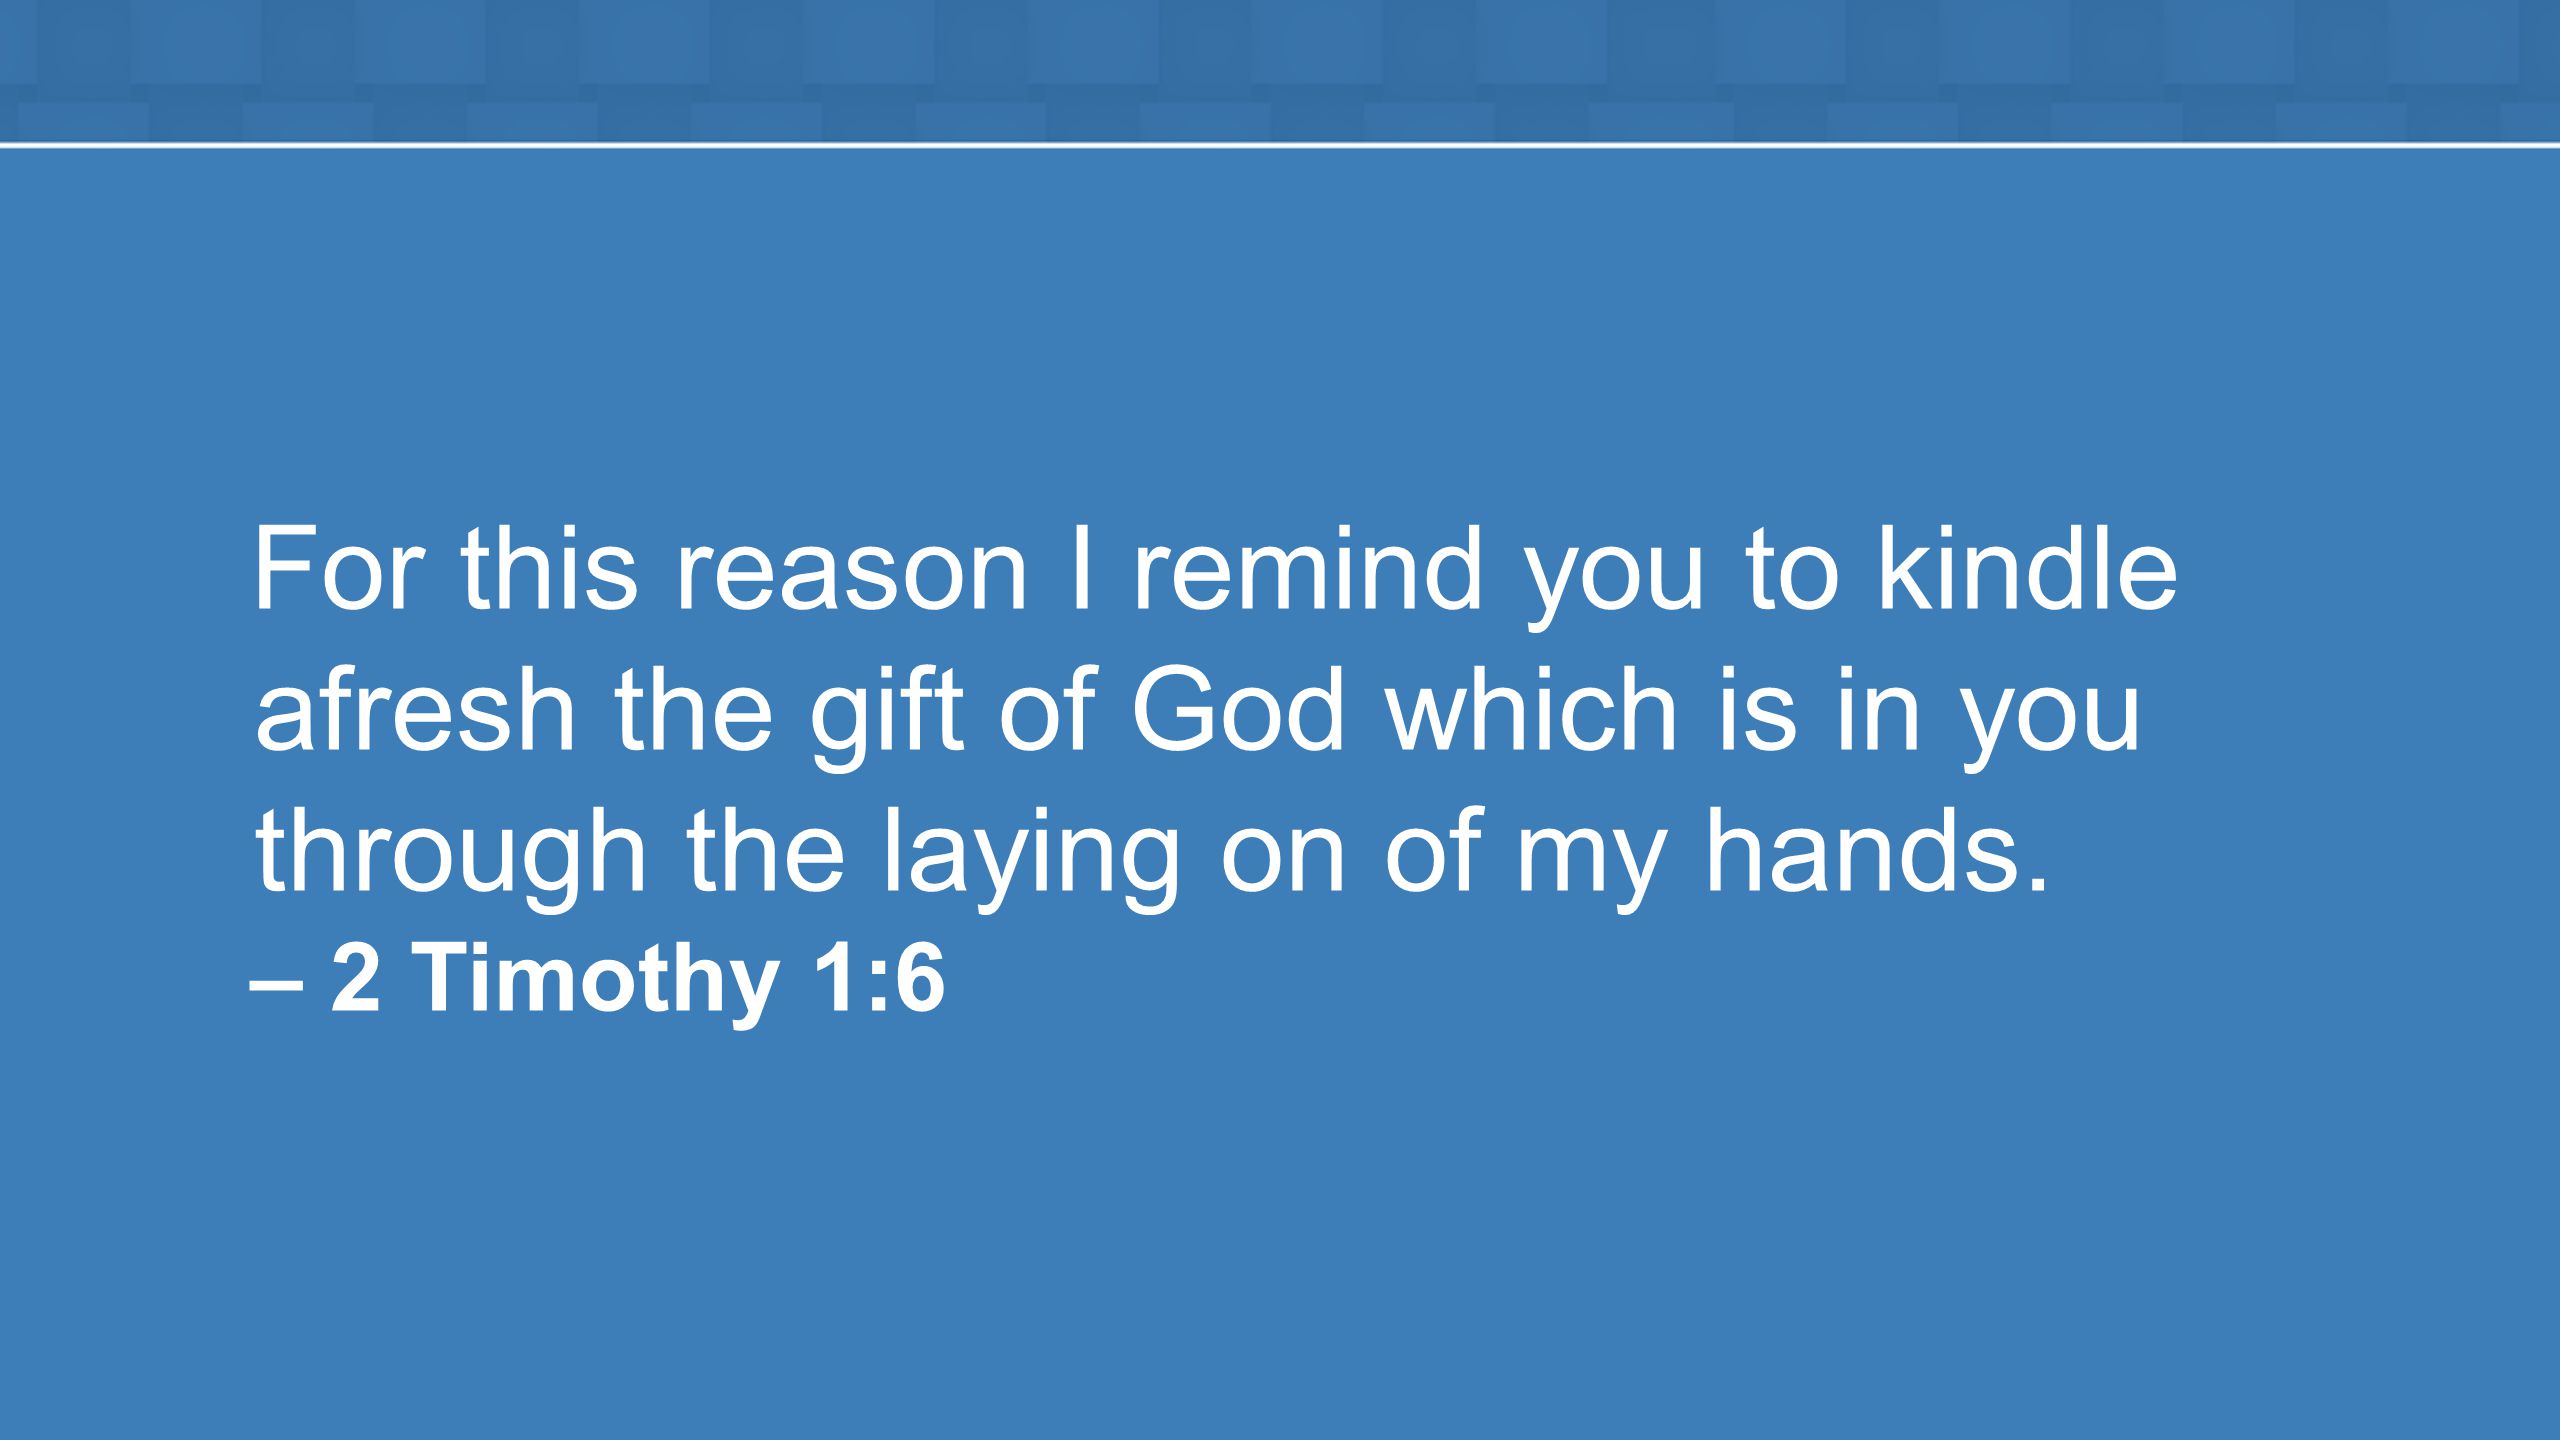 For this reason I remind you to kindle afresh the gift of God which is in you through the laying on of my hands.